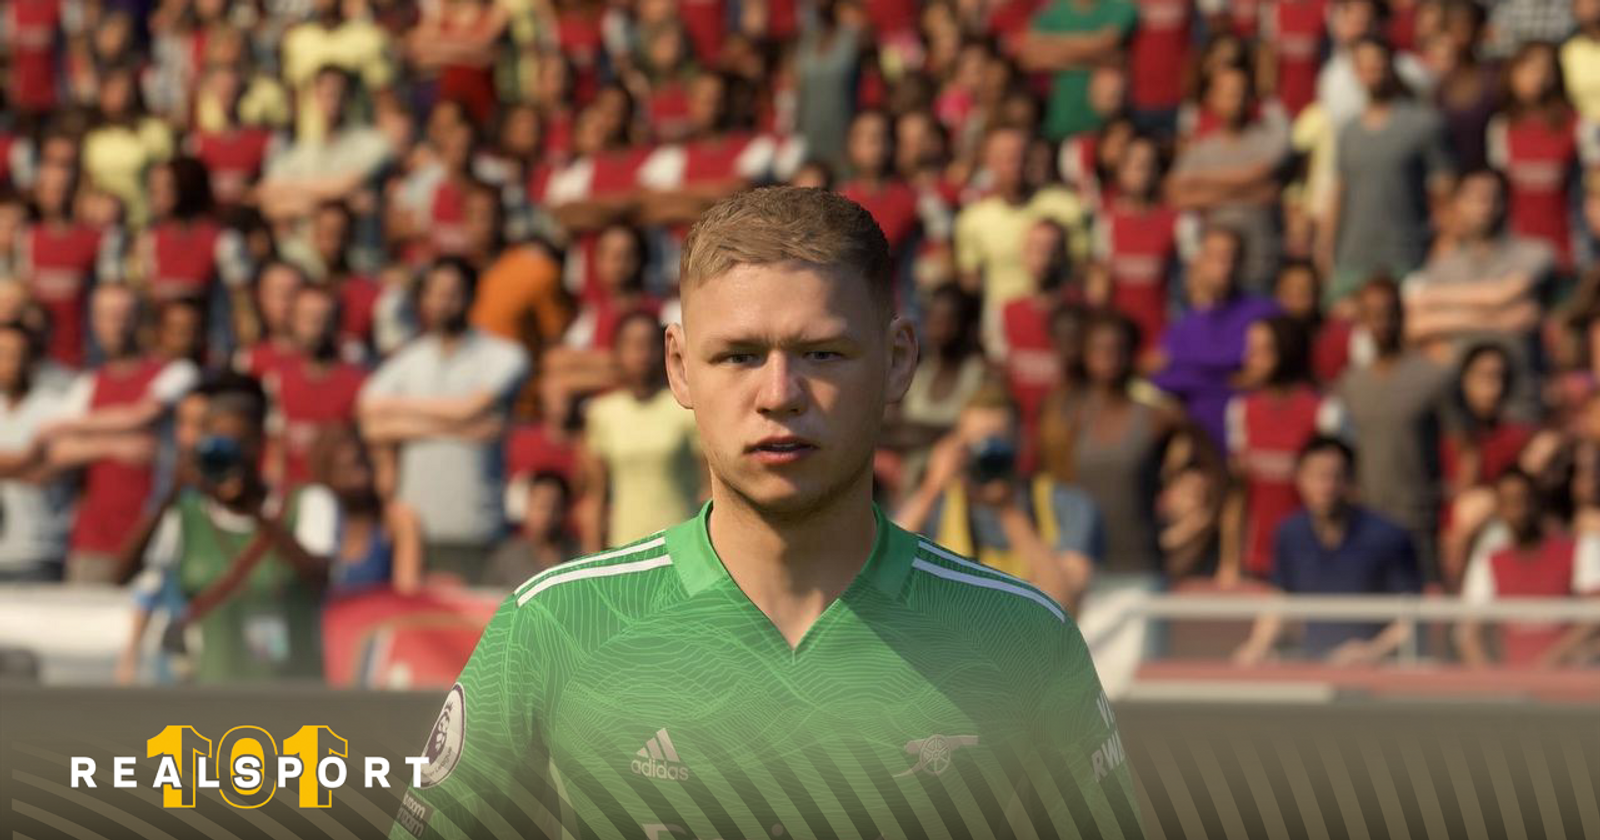 Revealed: The 10 most-improved players in FIFA 23